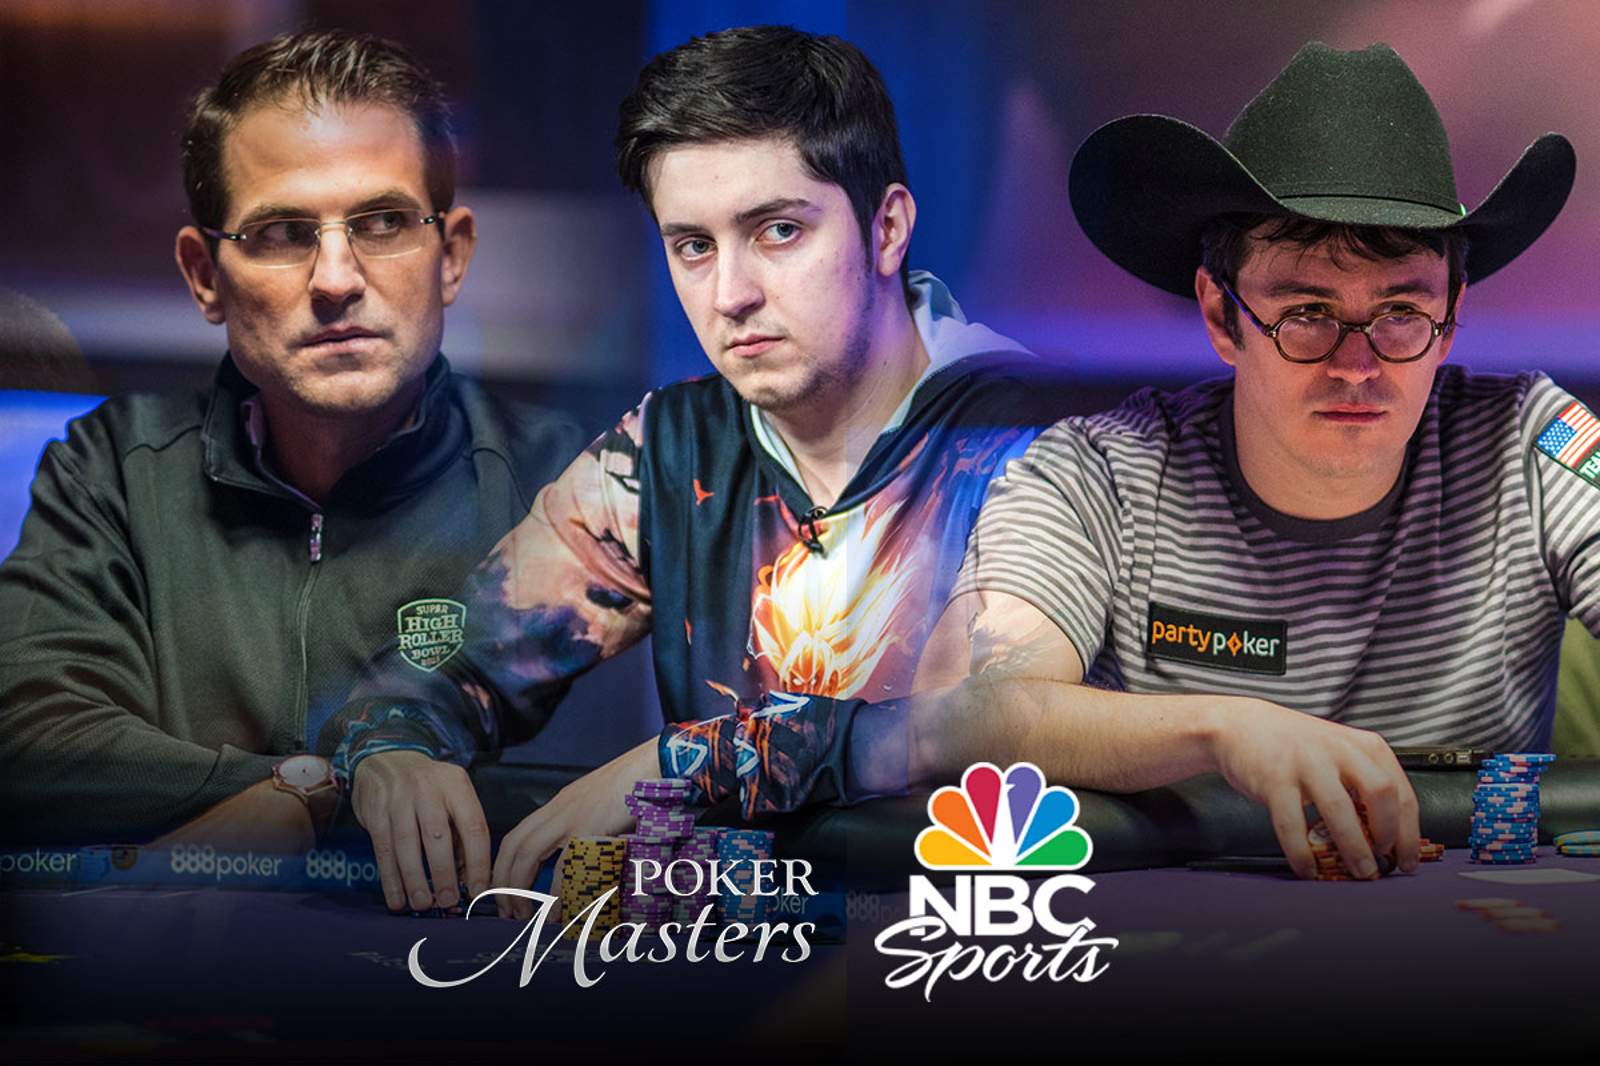 Settle in For a Long Night of Poker Masters Action on NBC Sports!